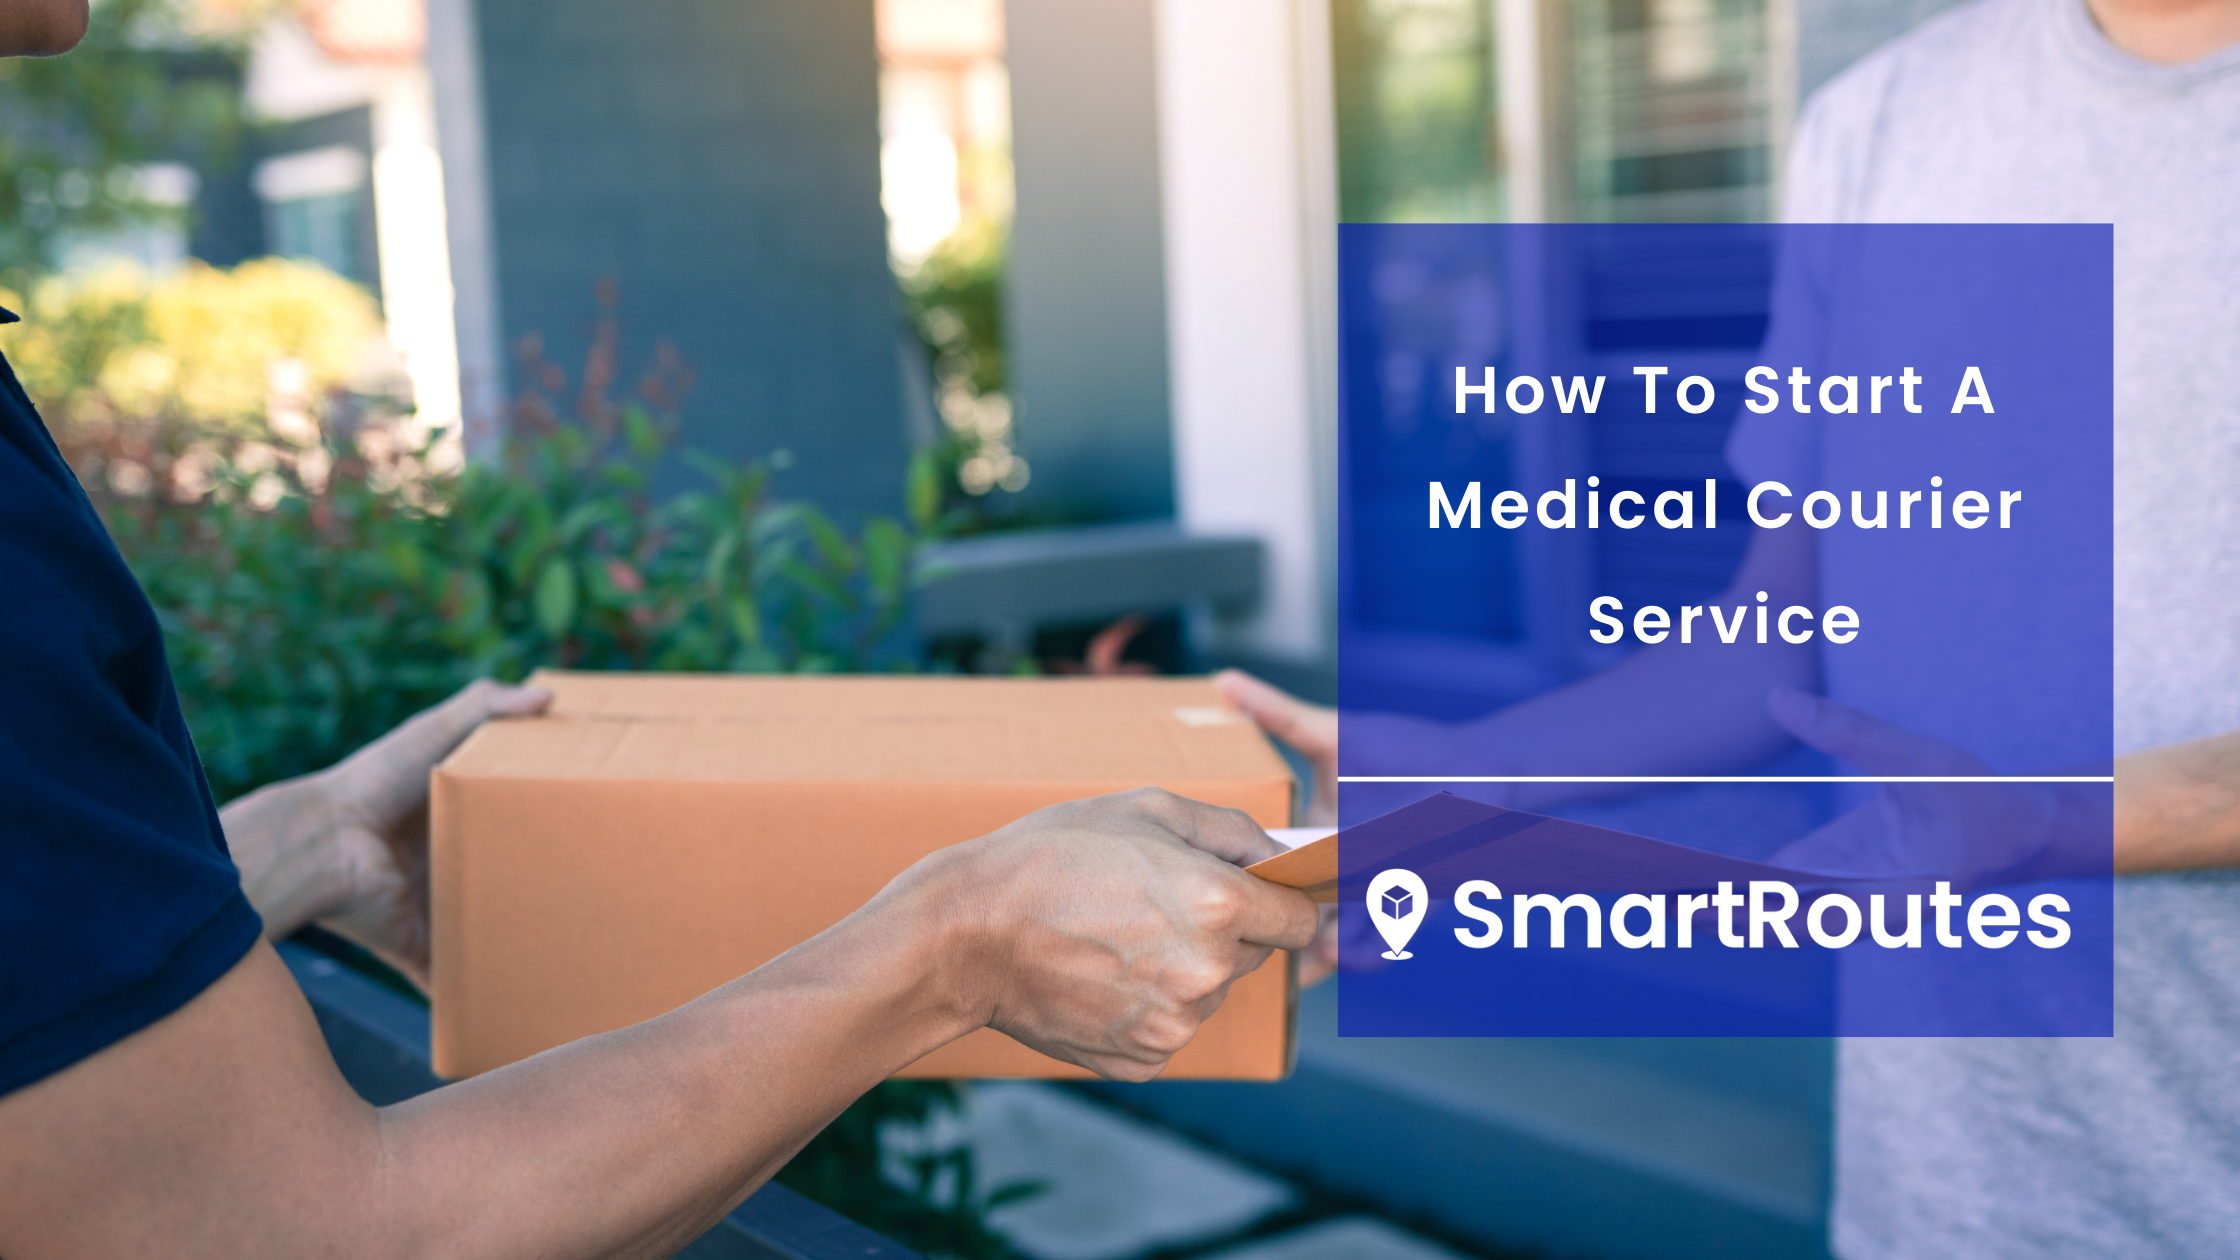 How To Start A Medical Courier Service